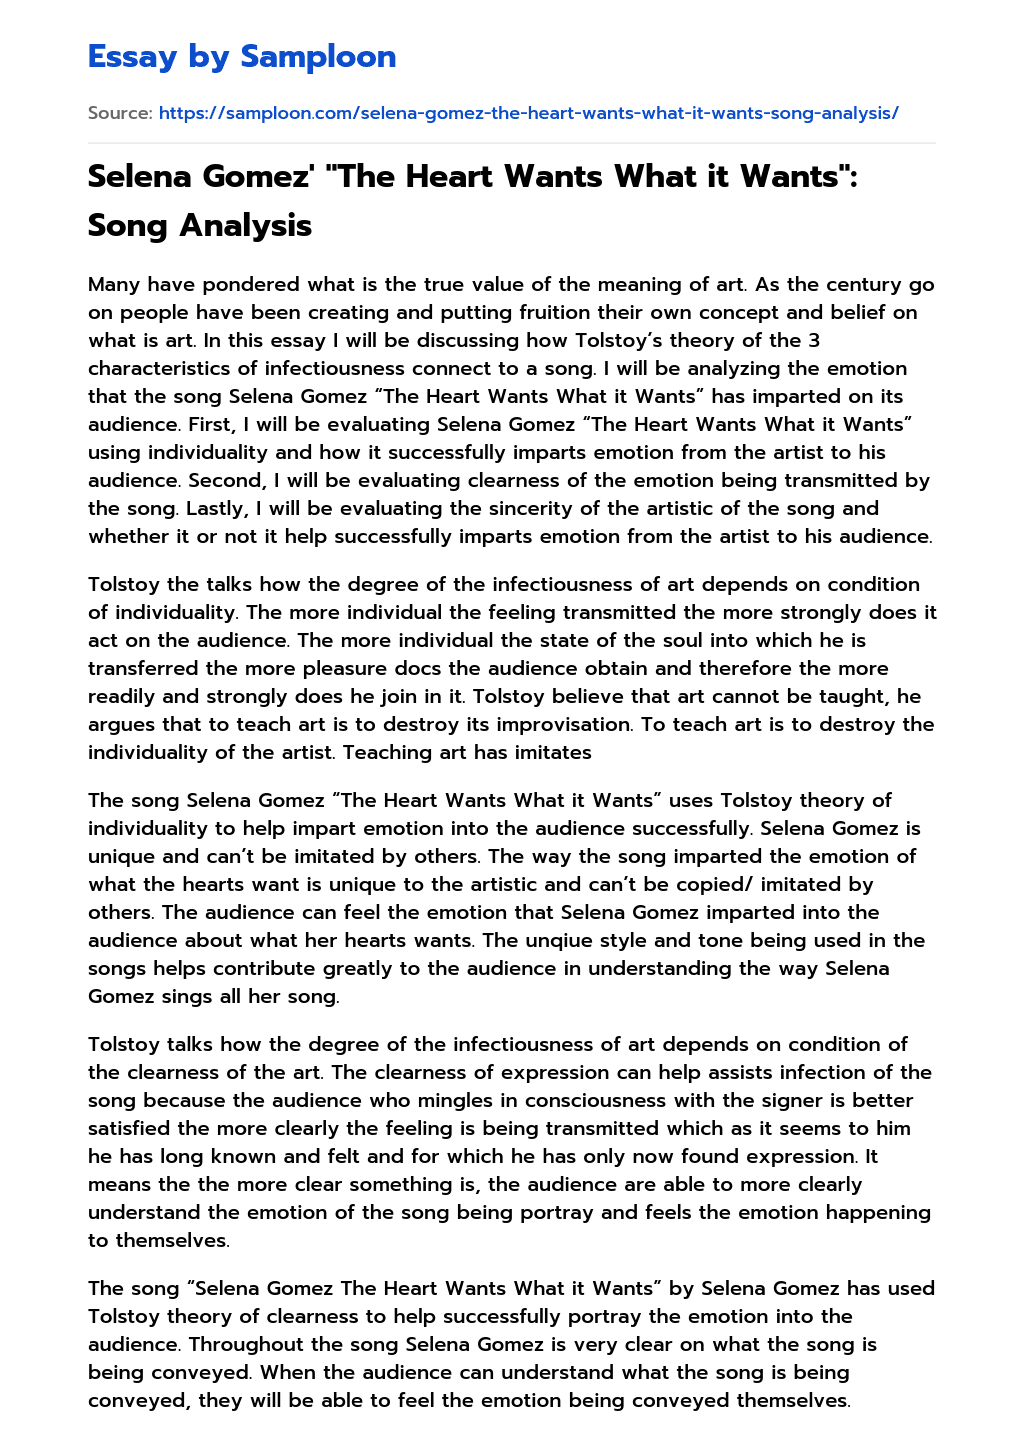 Selena Gomez’ “The Heart Wants What it Wants”: Song Analysis essay